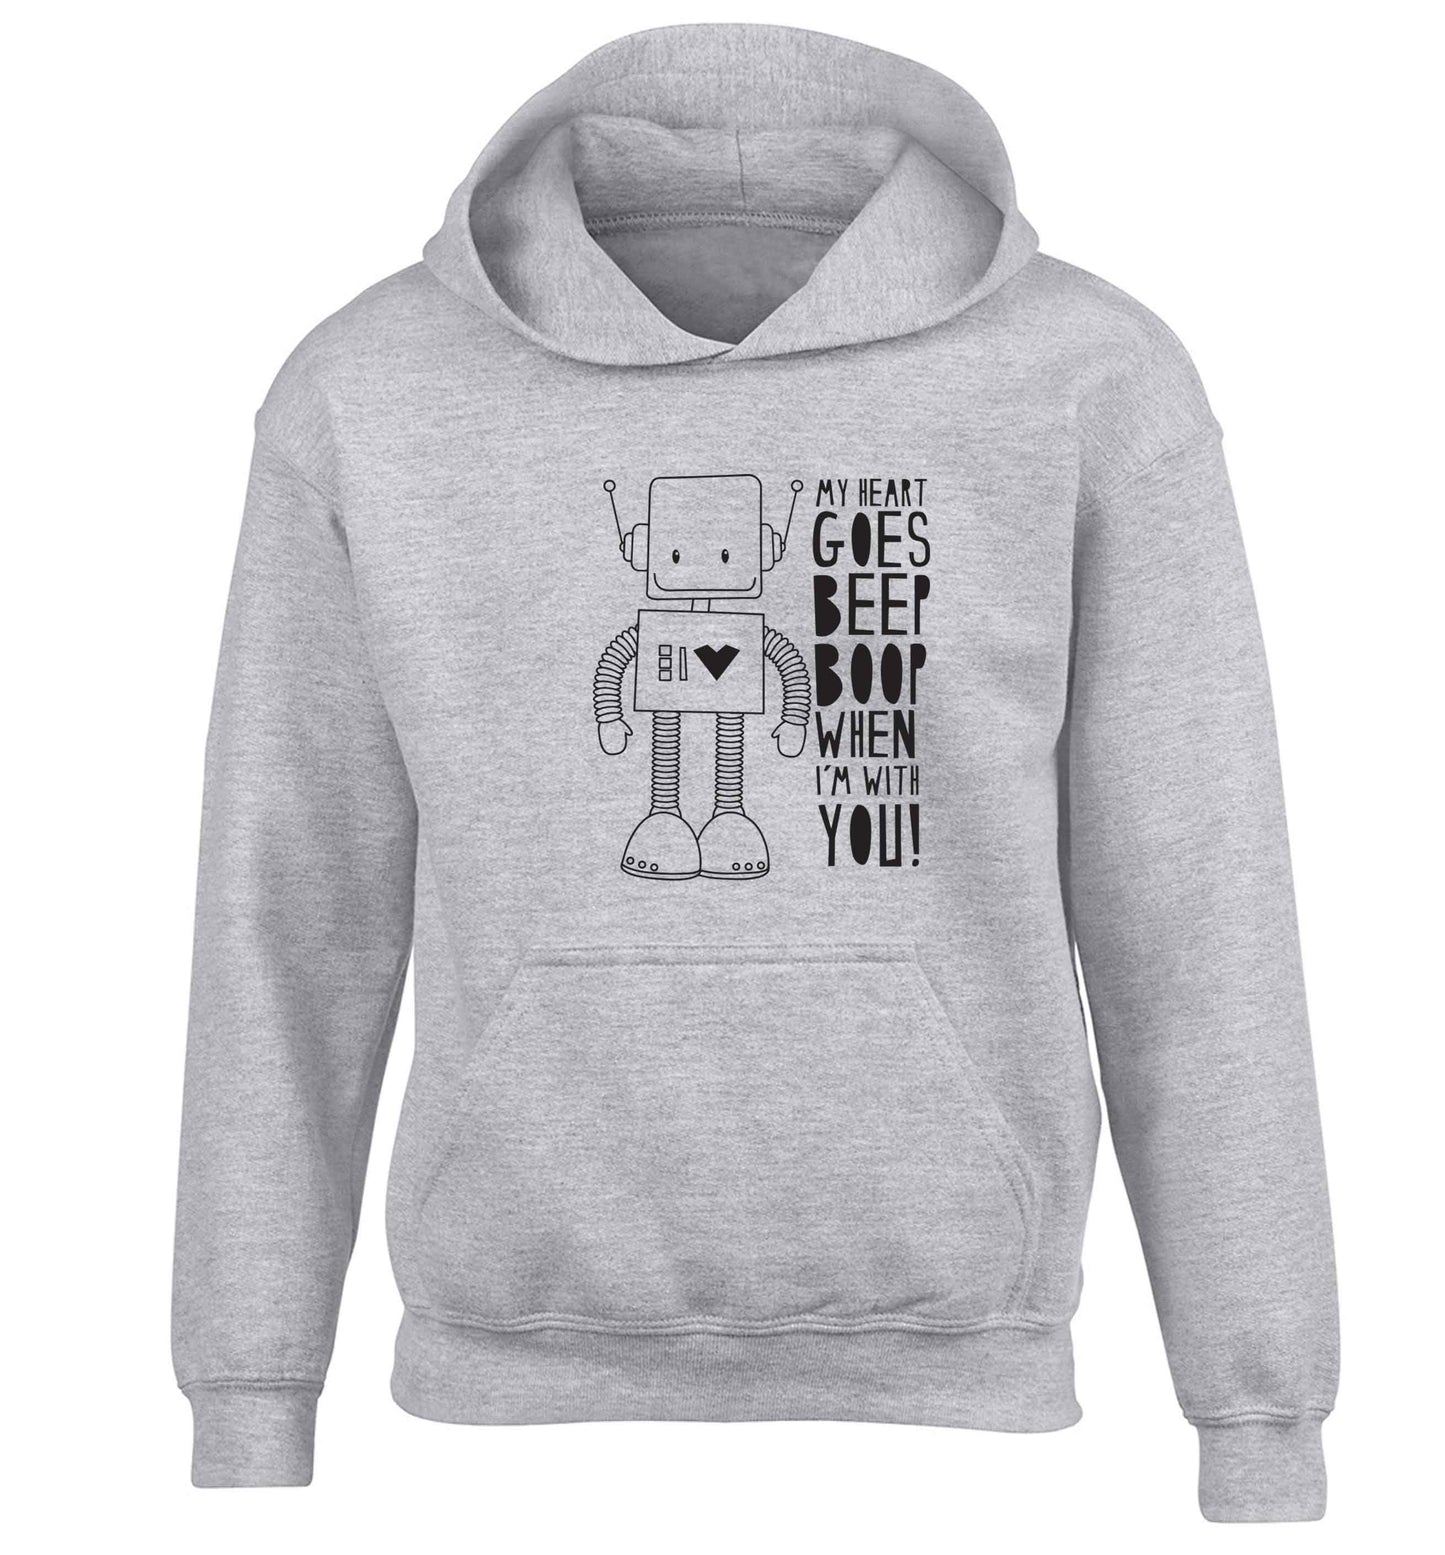 My heart goes beep boop when I'm with you children's grey hoodie 12-13 Years